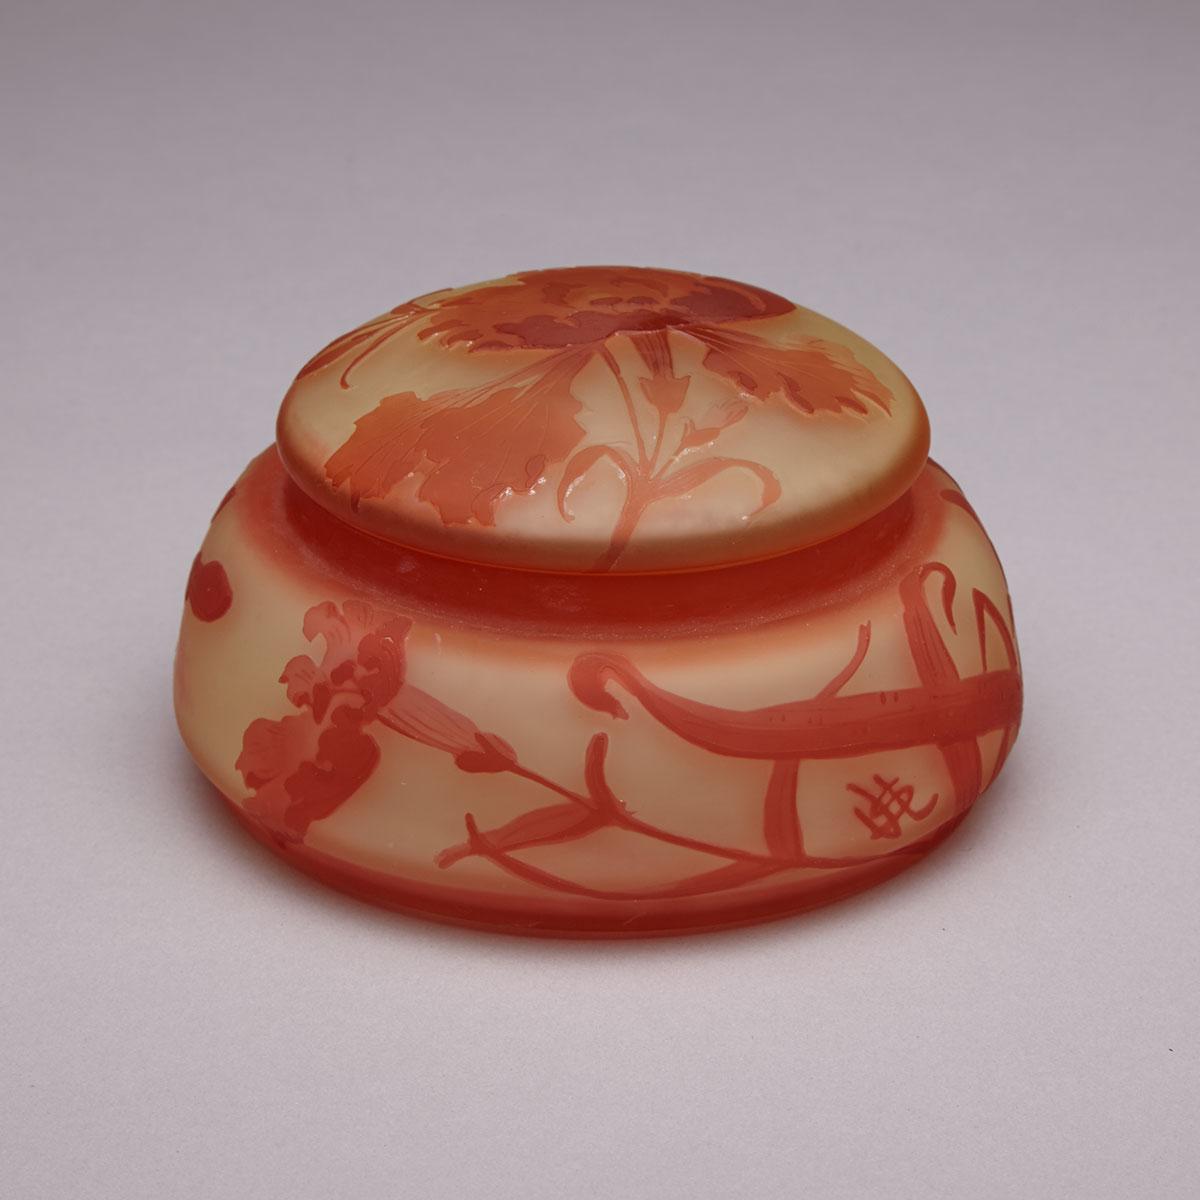 Val St. Lambert Cameo Glass Covered Jar, early 20th century